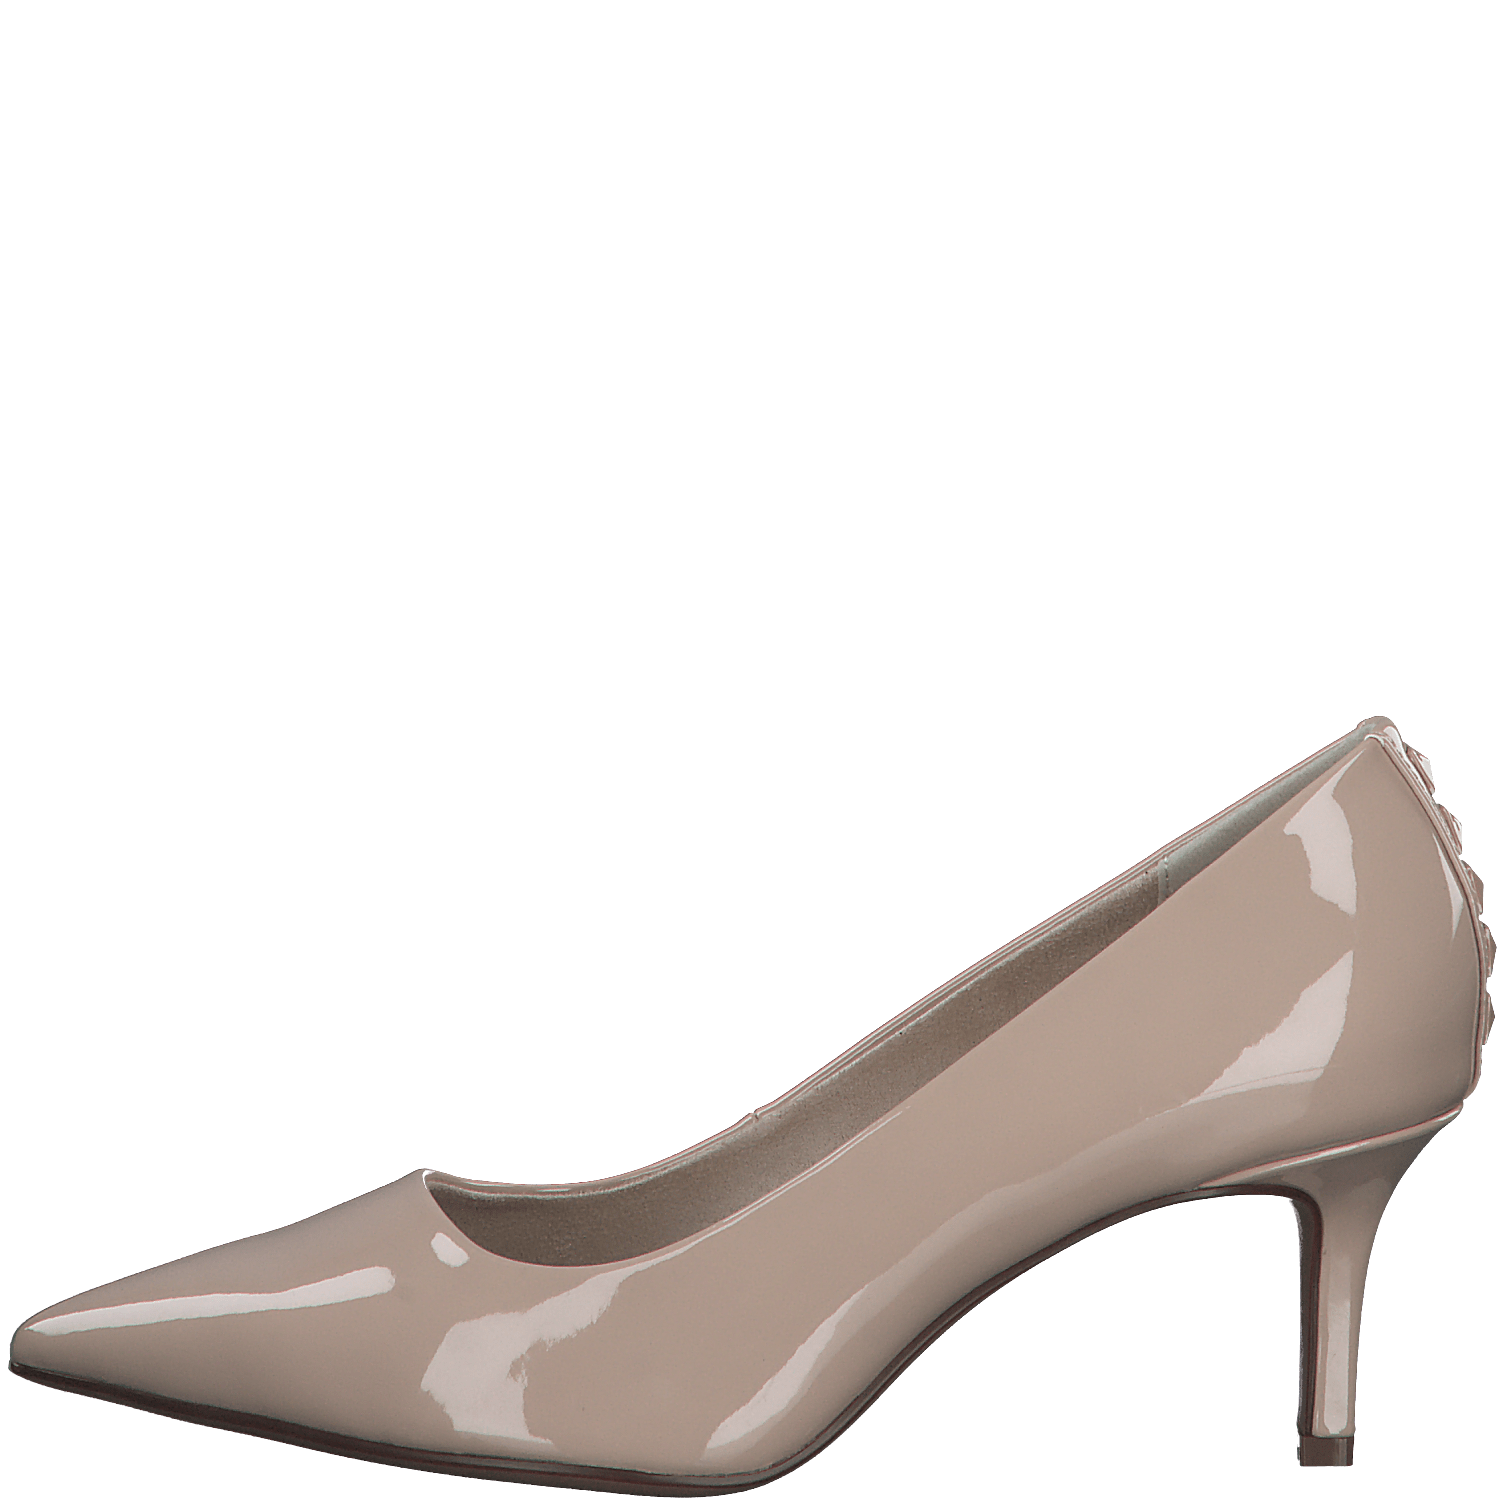 S OLIVER Nude Patent Court Shoe